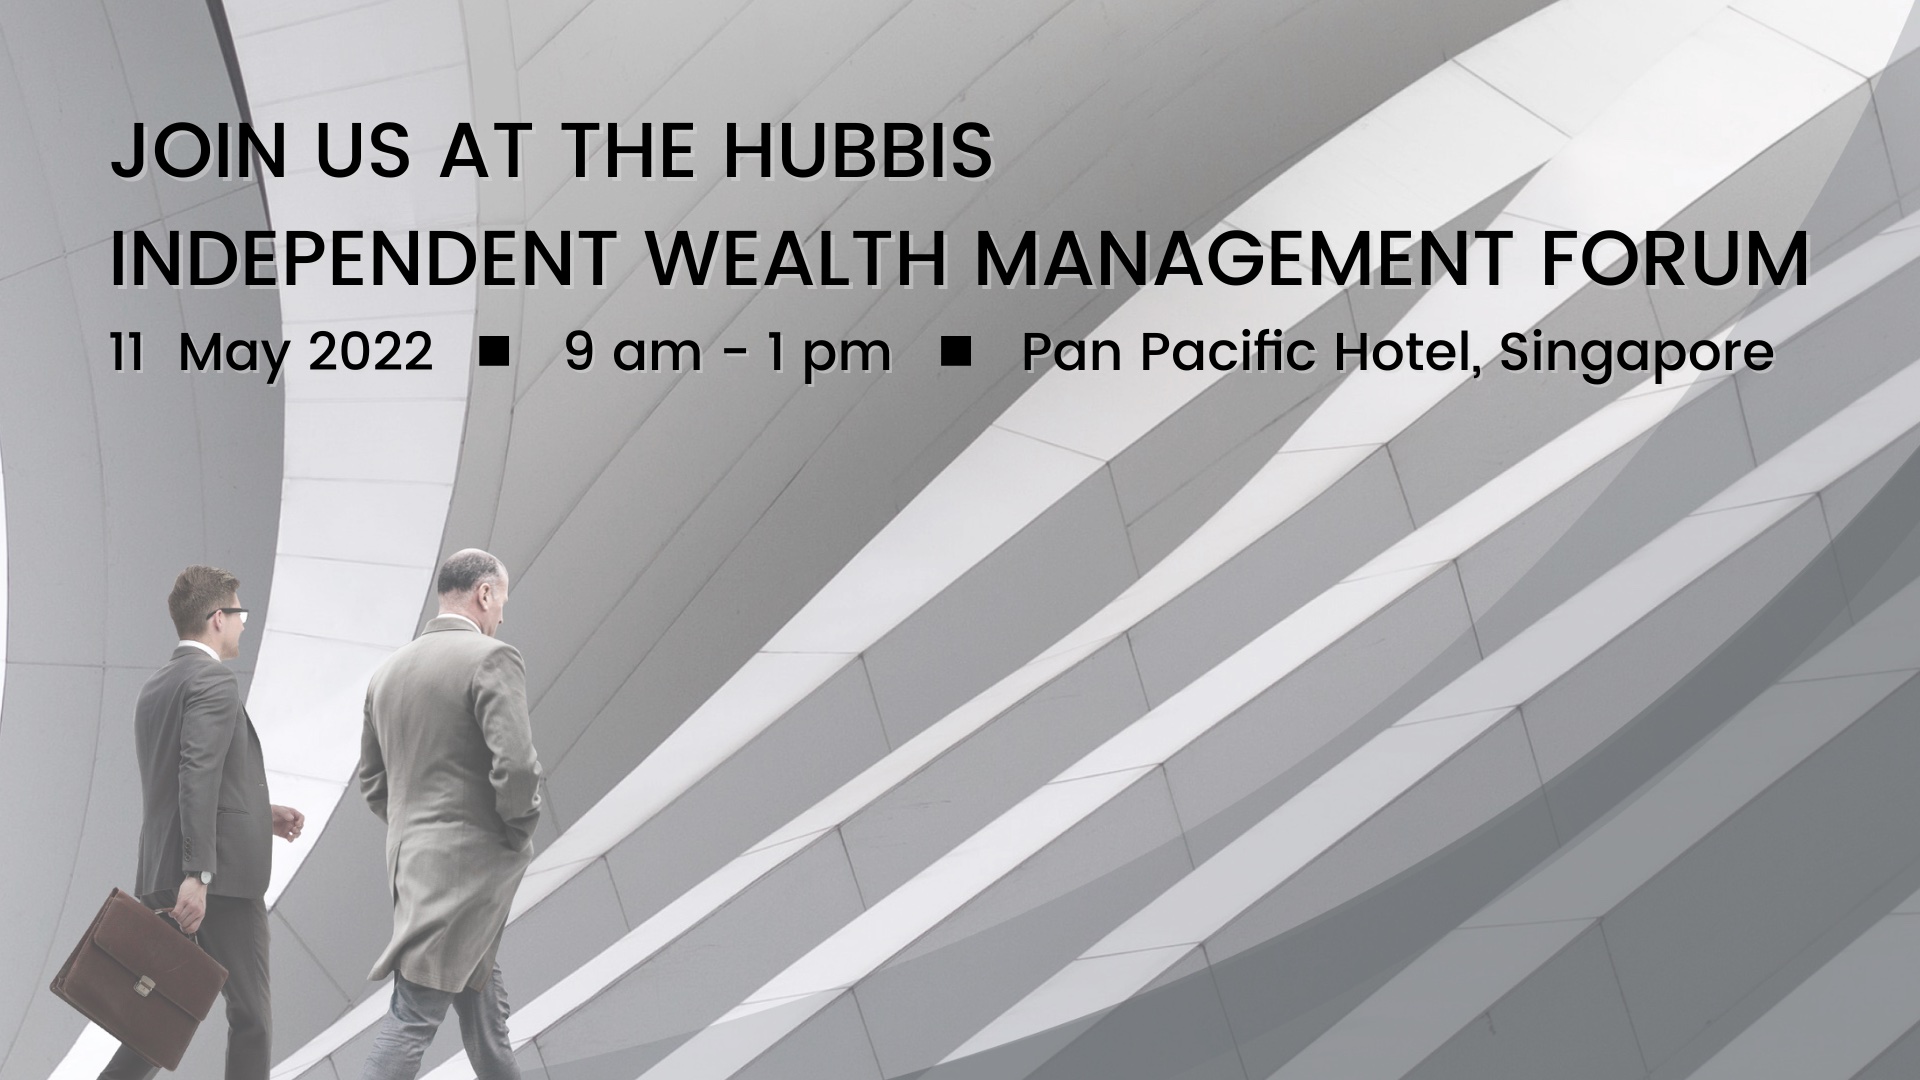 David Packham at the Hubbis Independent Wealth Management Forum in Singapore